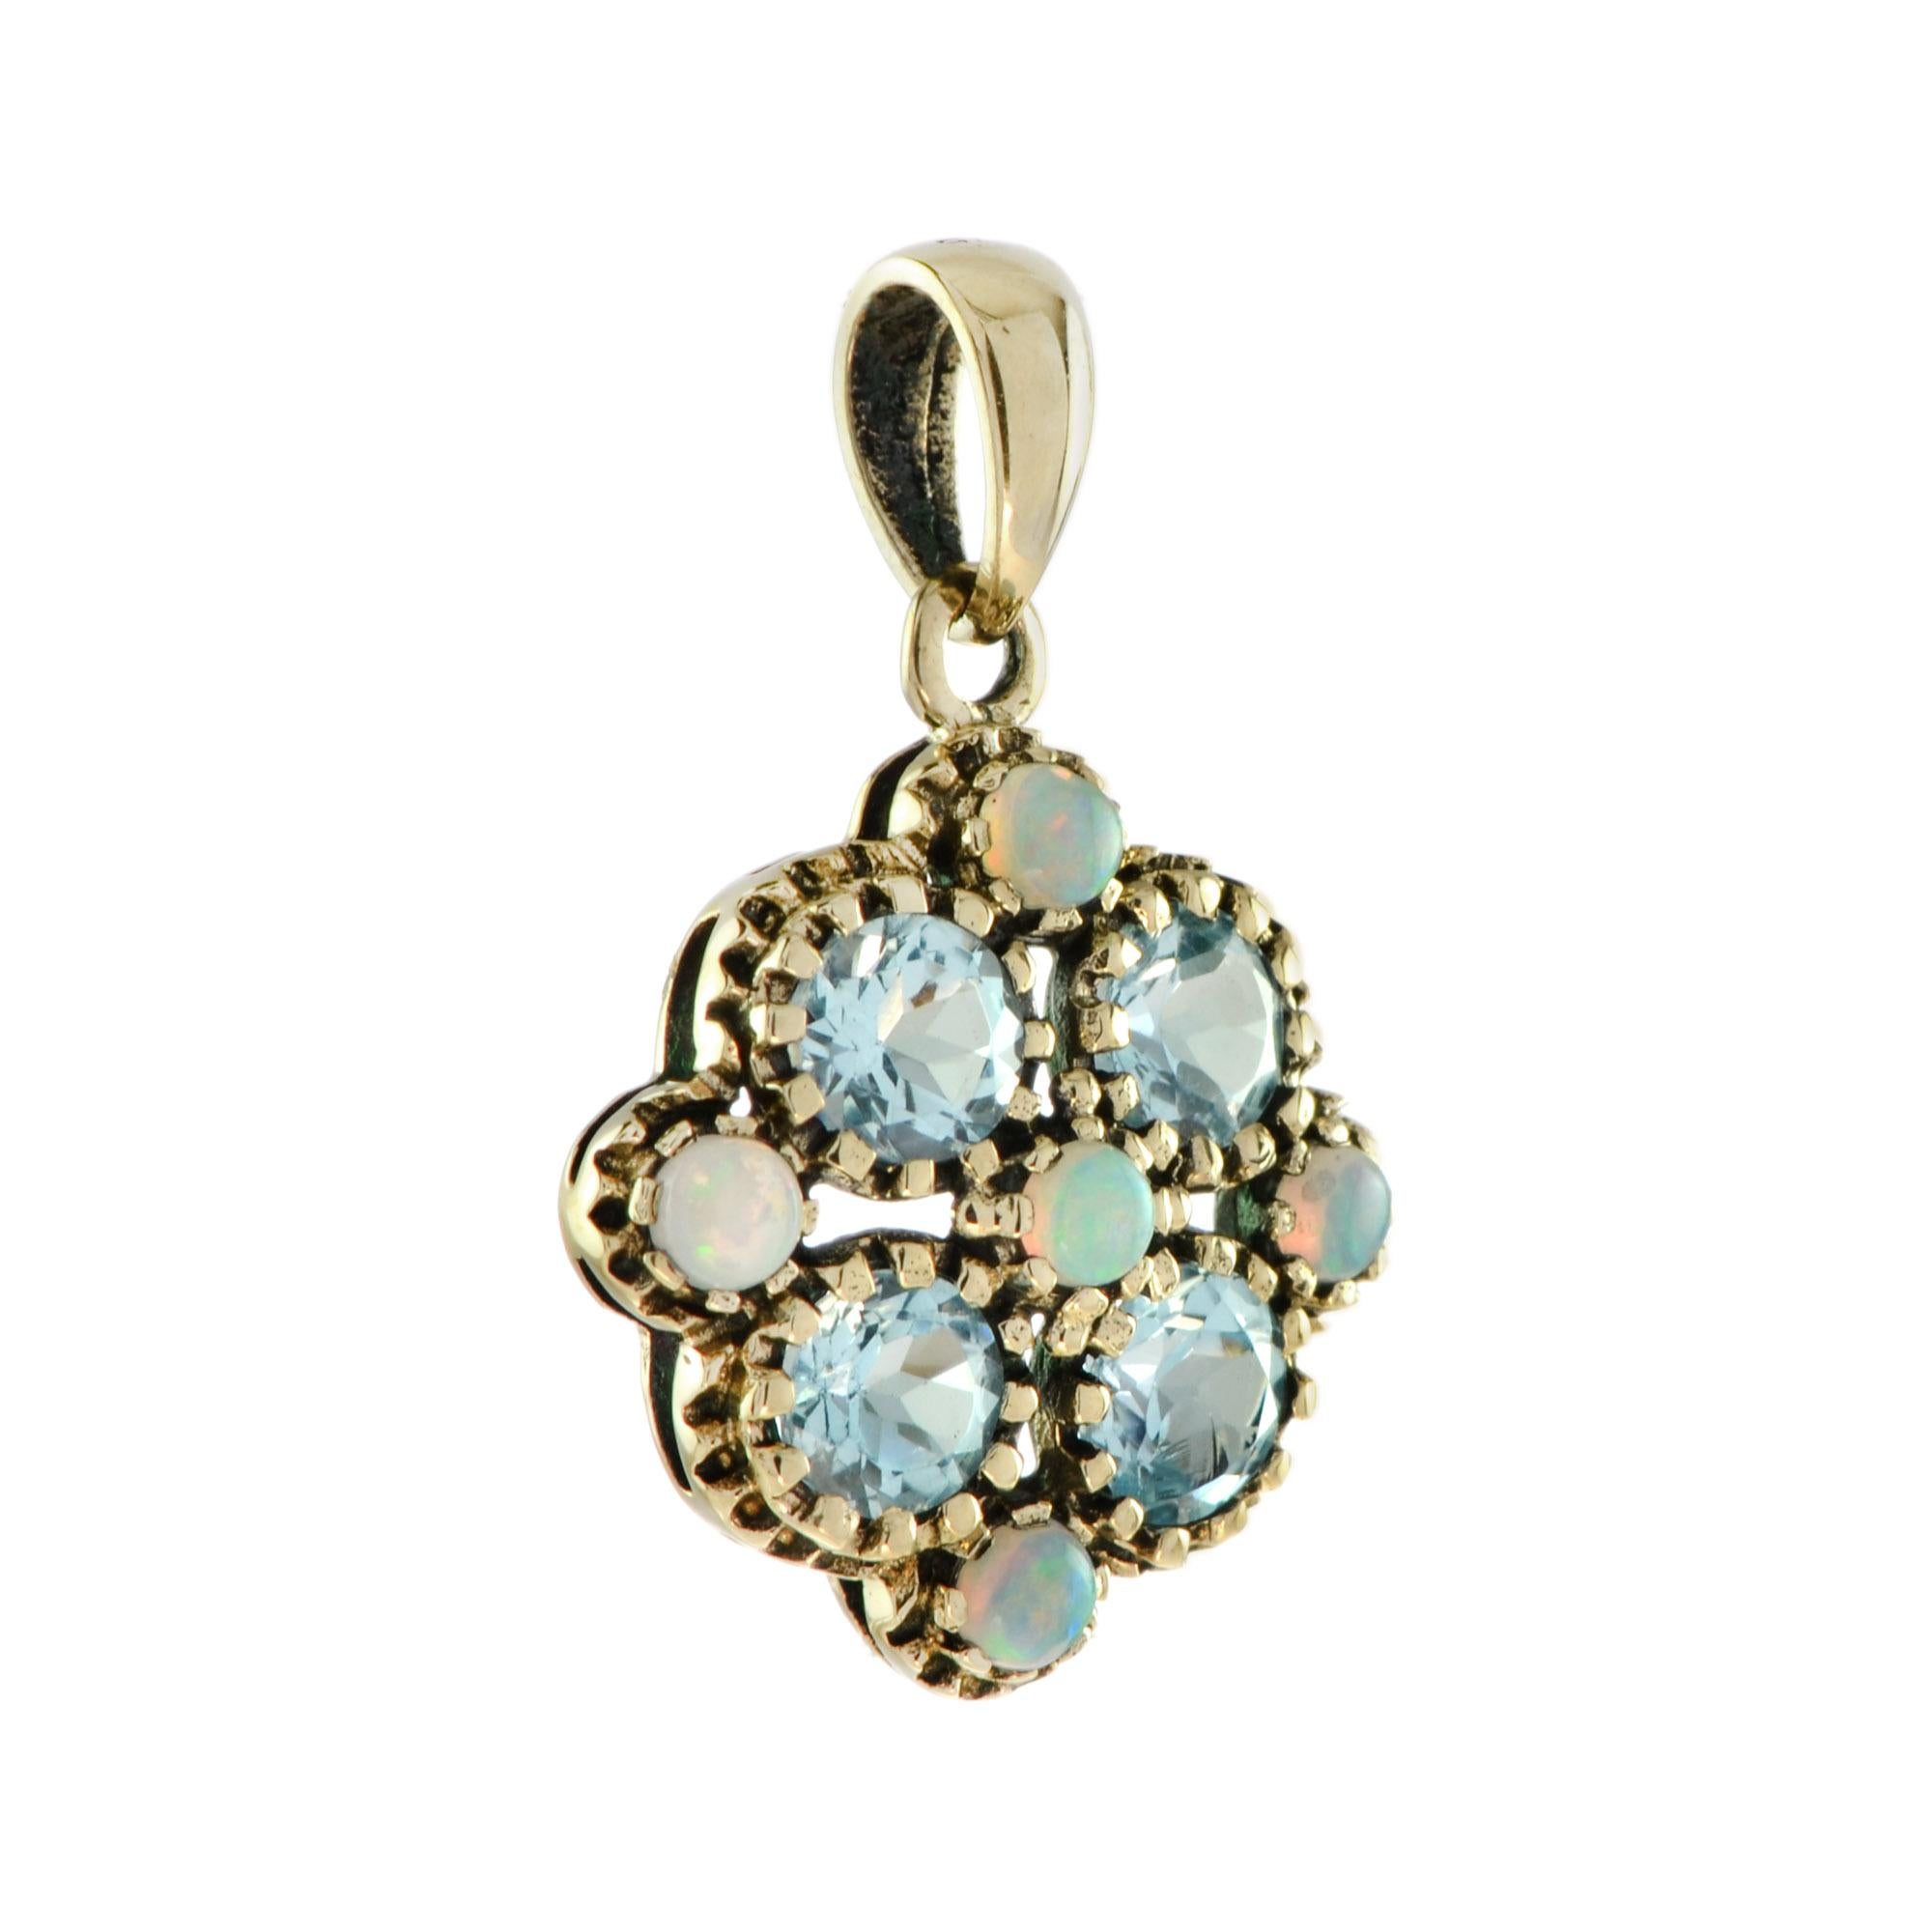 Impressive blue topaz and opal yellow gold floral pendant. Sky blue topaz is artfully fashioned with round pretty petals. Center of the flower and surround are arrayed with opals. It is a truly magnificent piece. 

Information
Style: